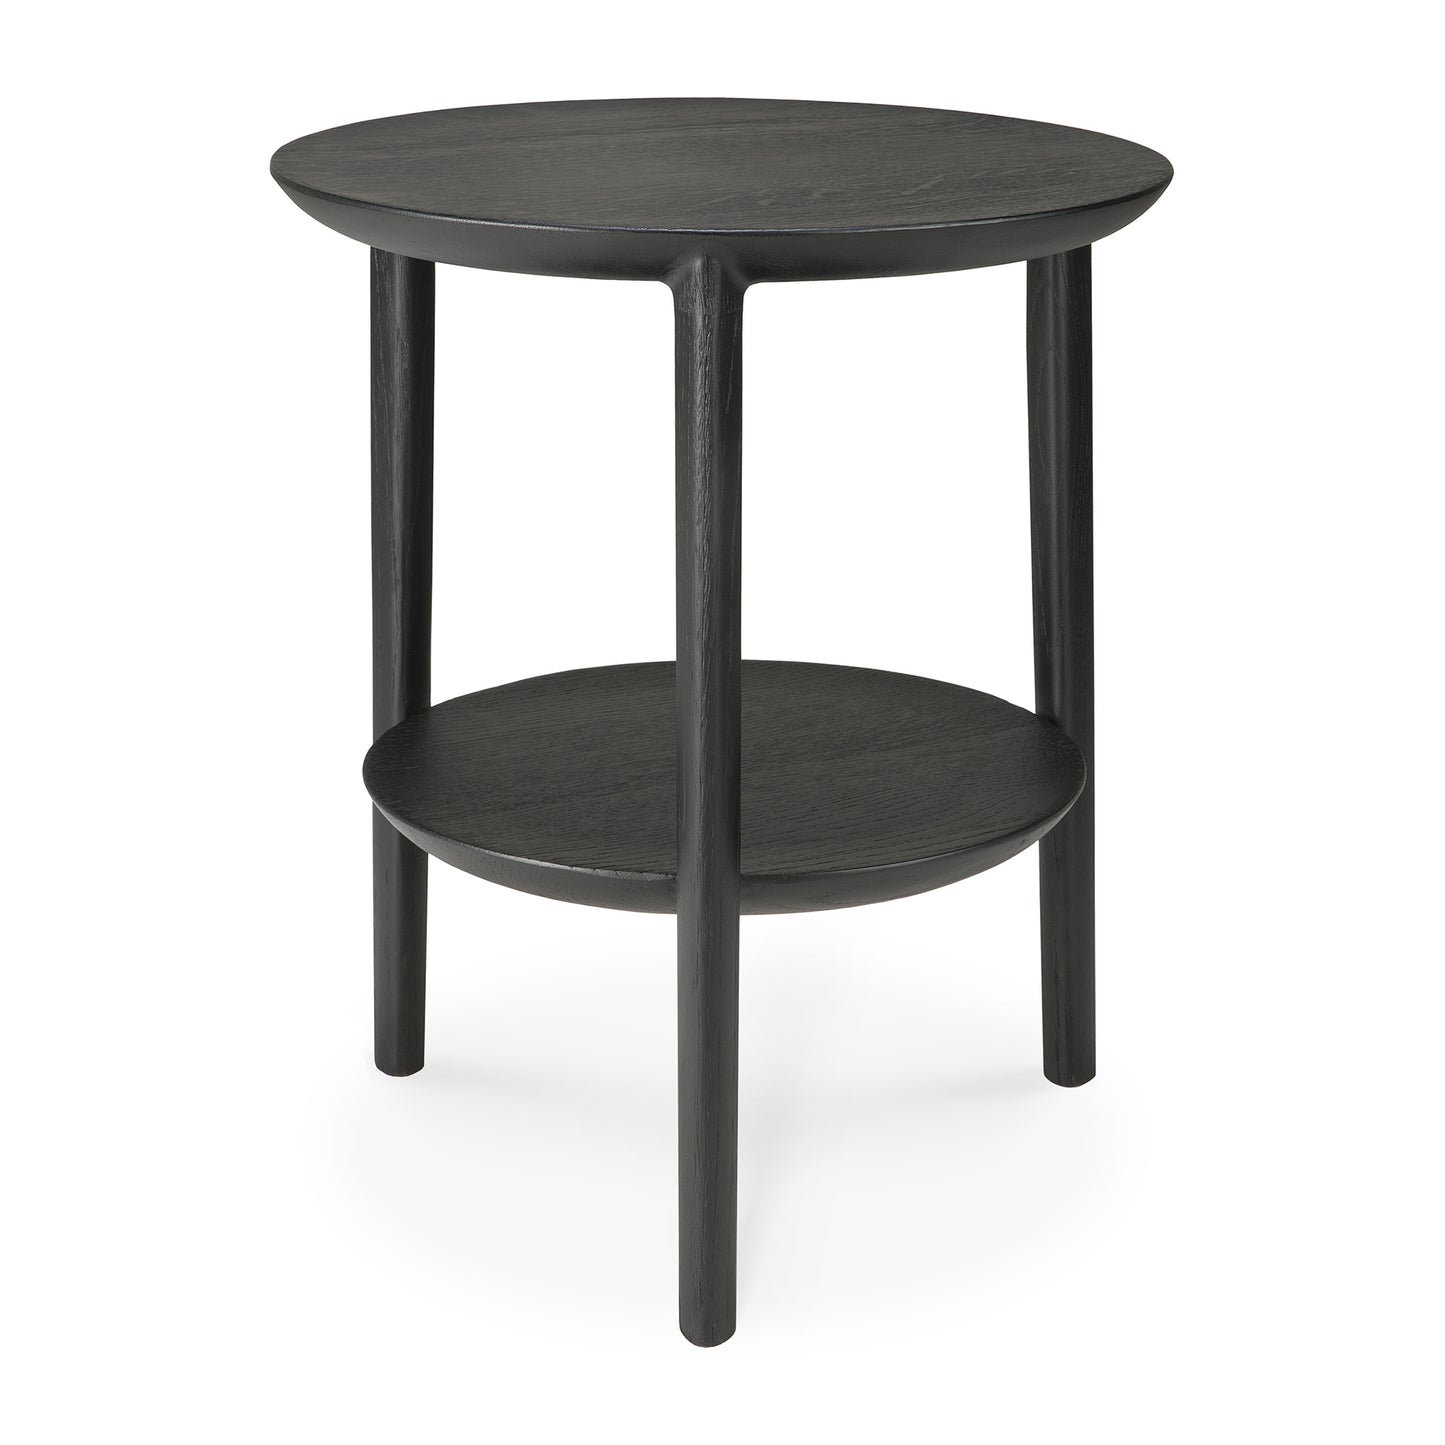 Ethnicraft Oak Bok Side Table available from Make Your House A Home, Bendigo, Victoria, Australia